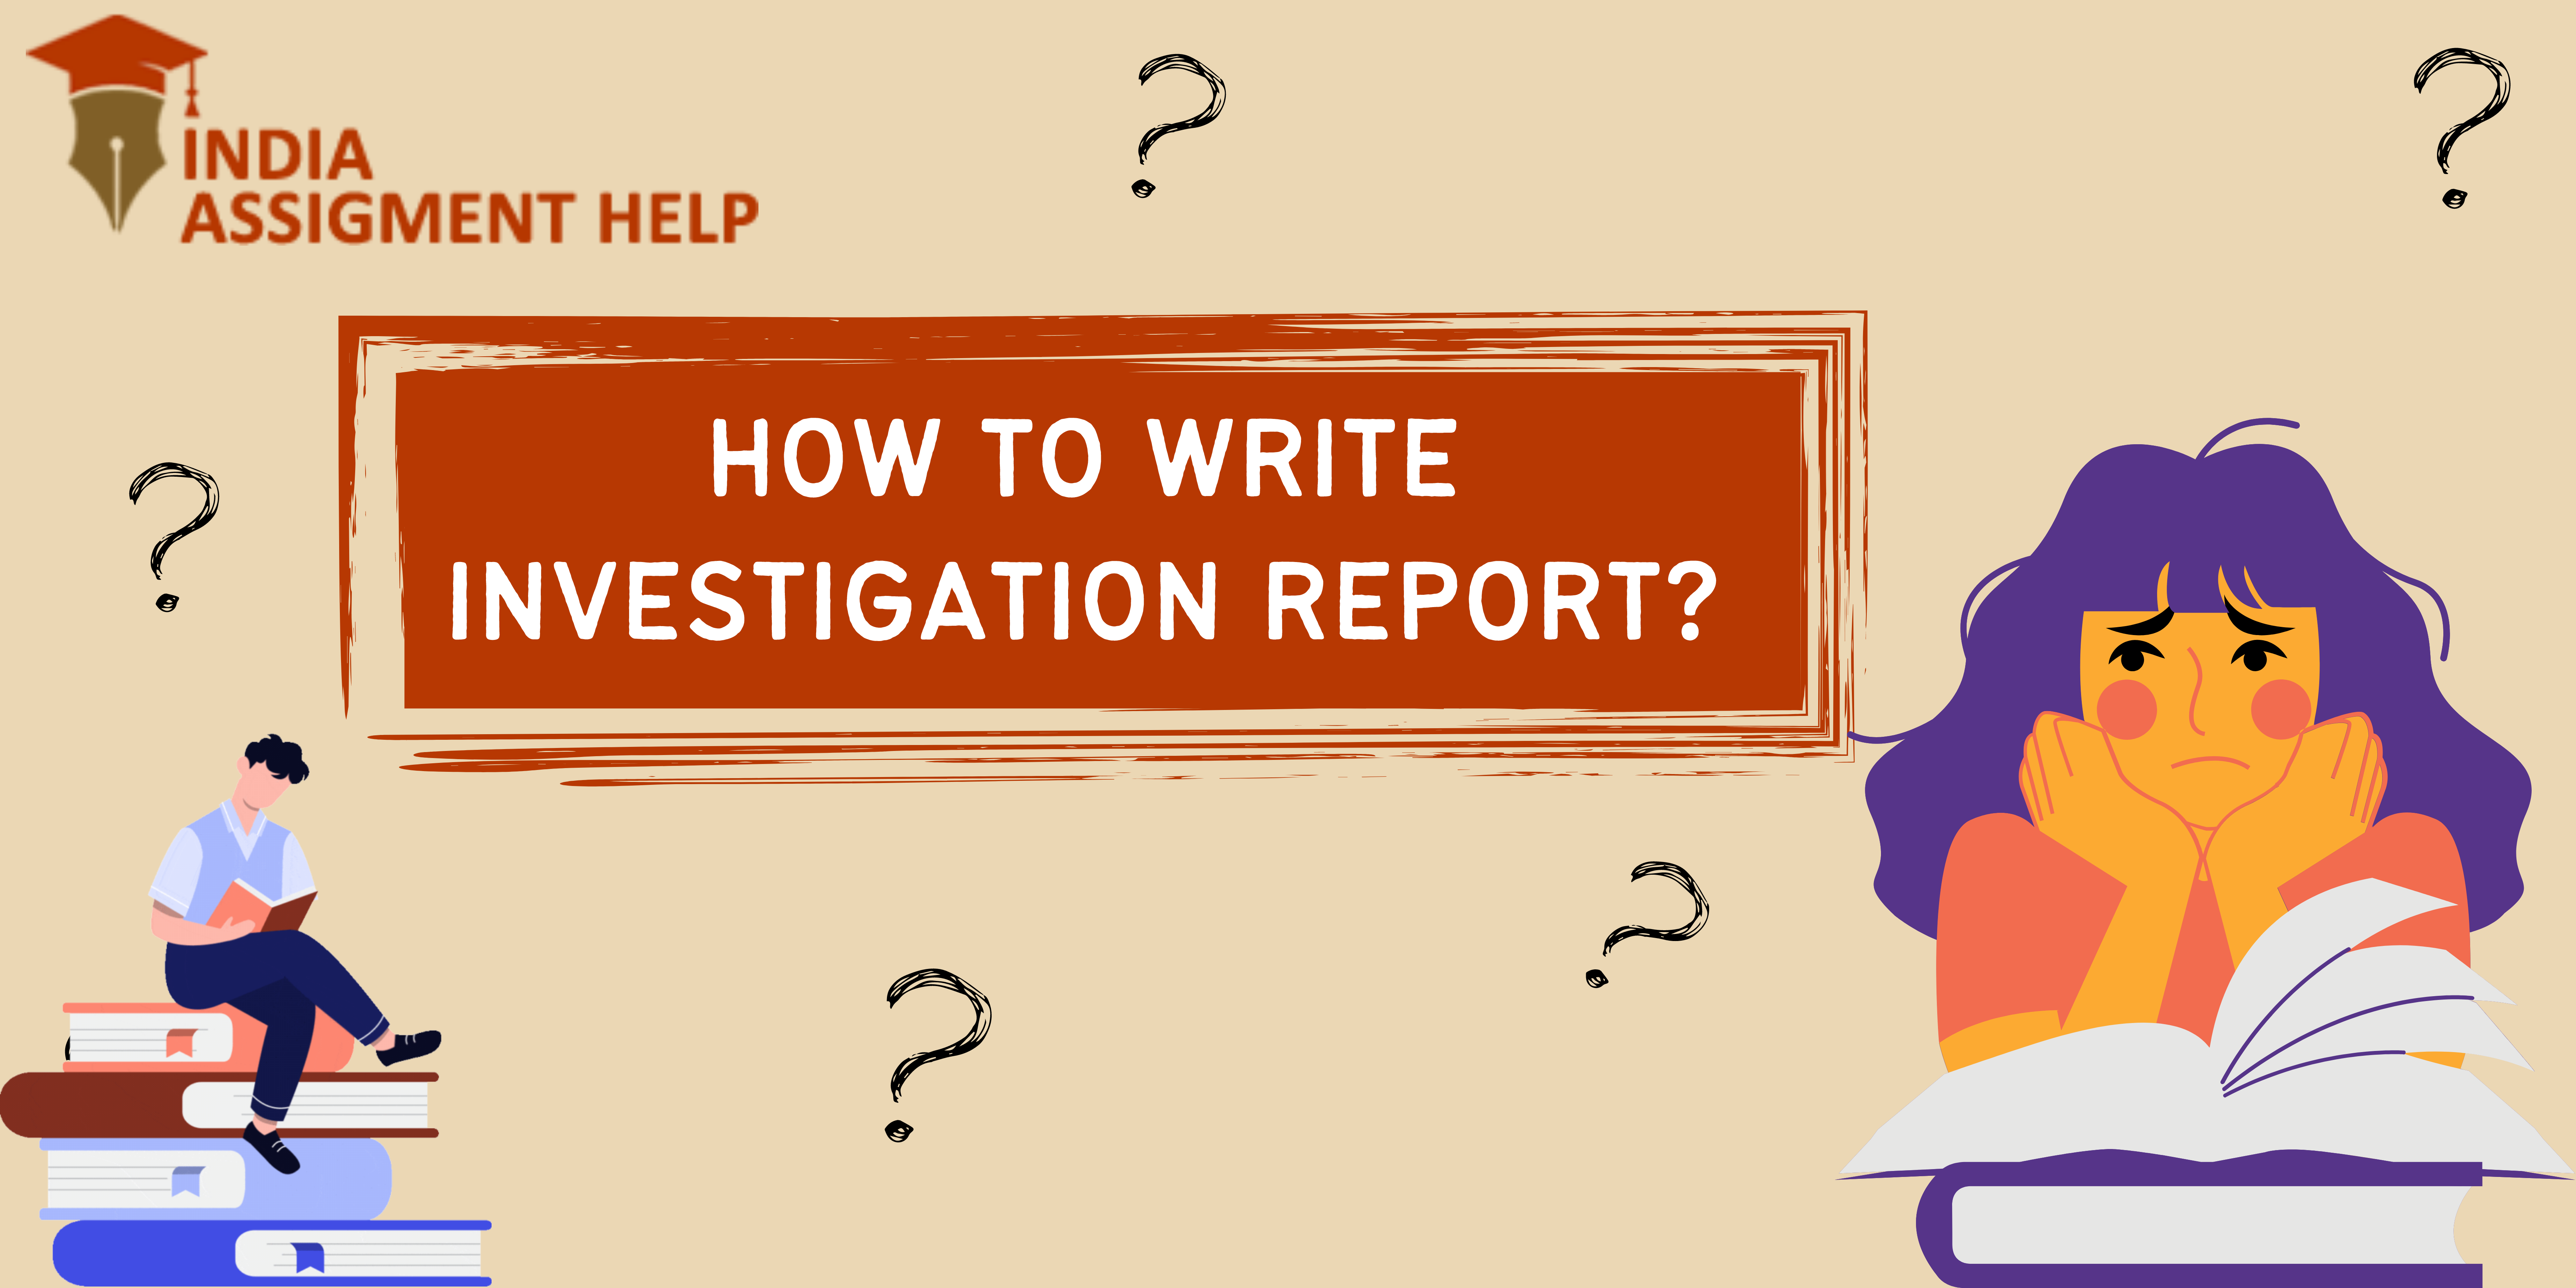 How to Write an Investigation Report